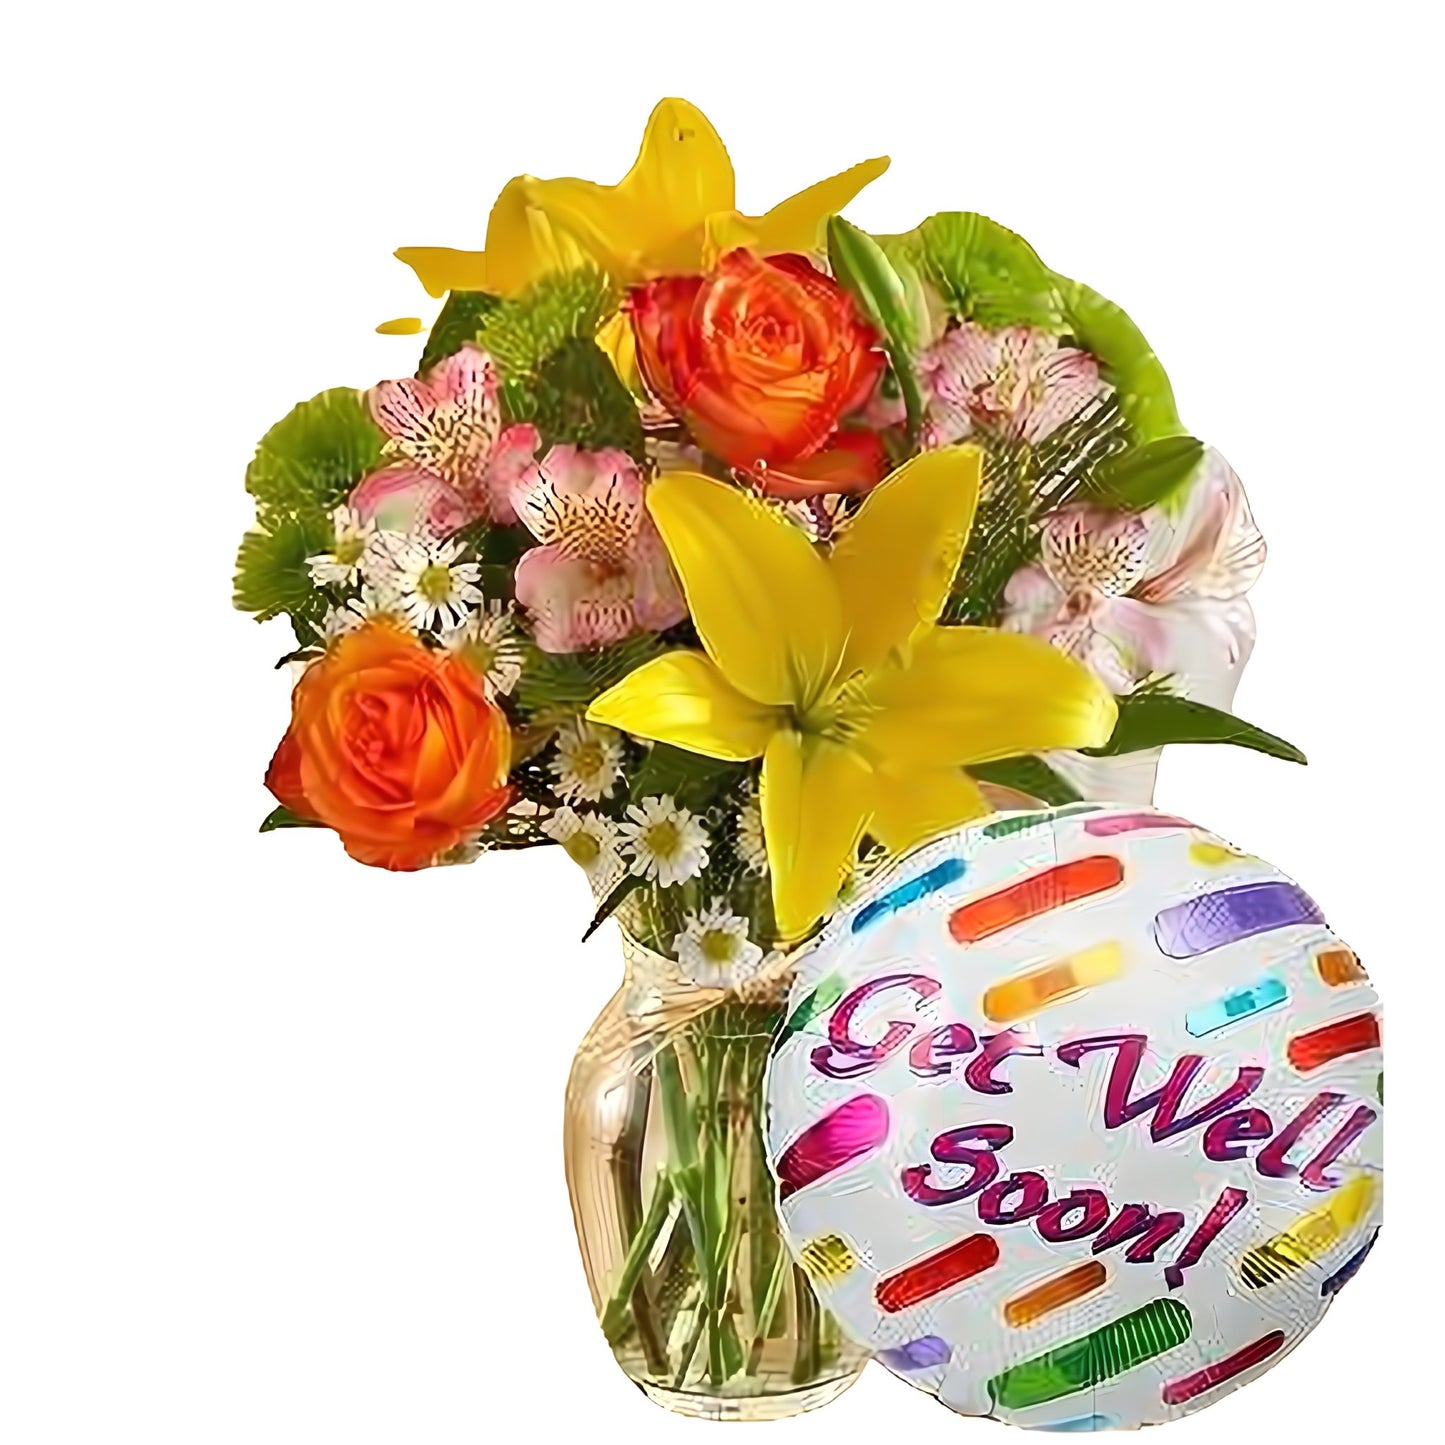 Fields of the World w/ Get Well Balloon - Floral_Arrangement - Flower Delivery NYC